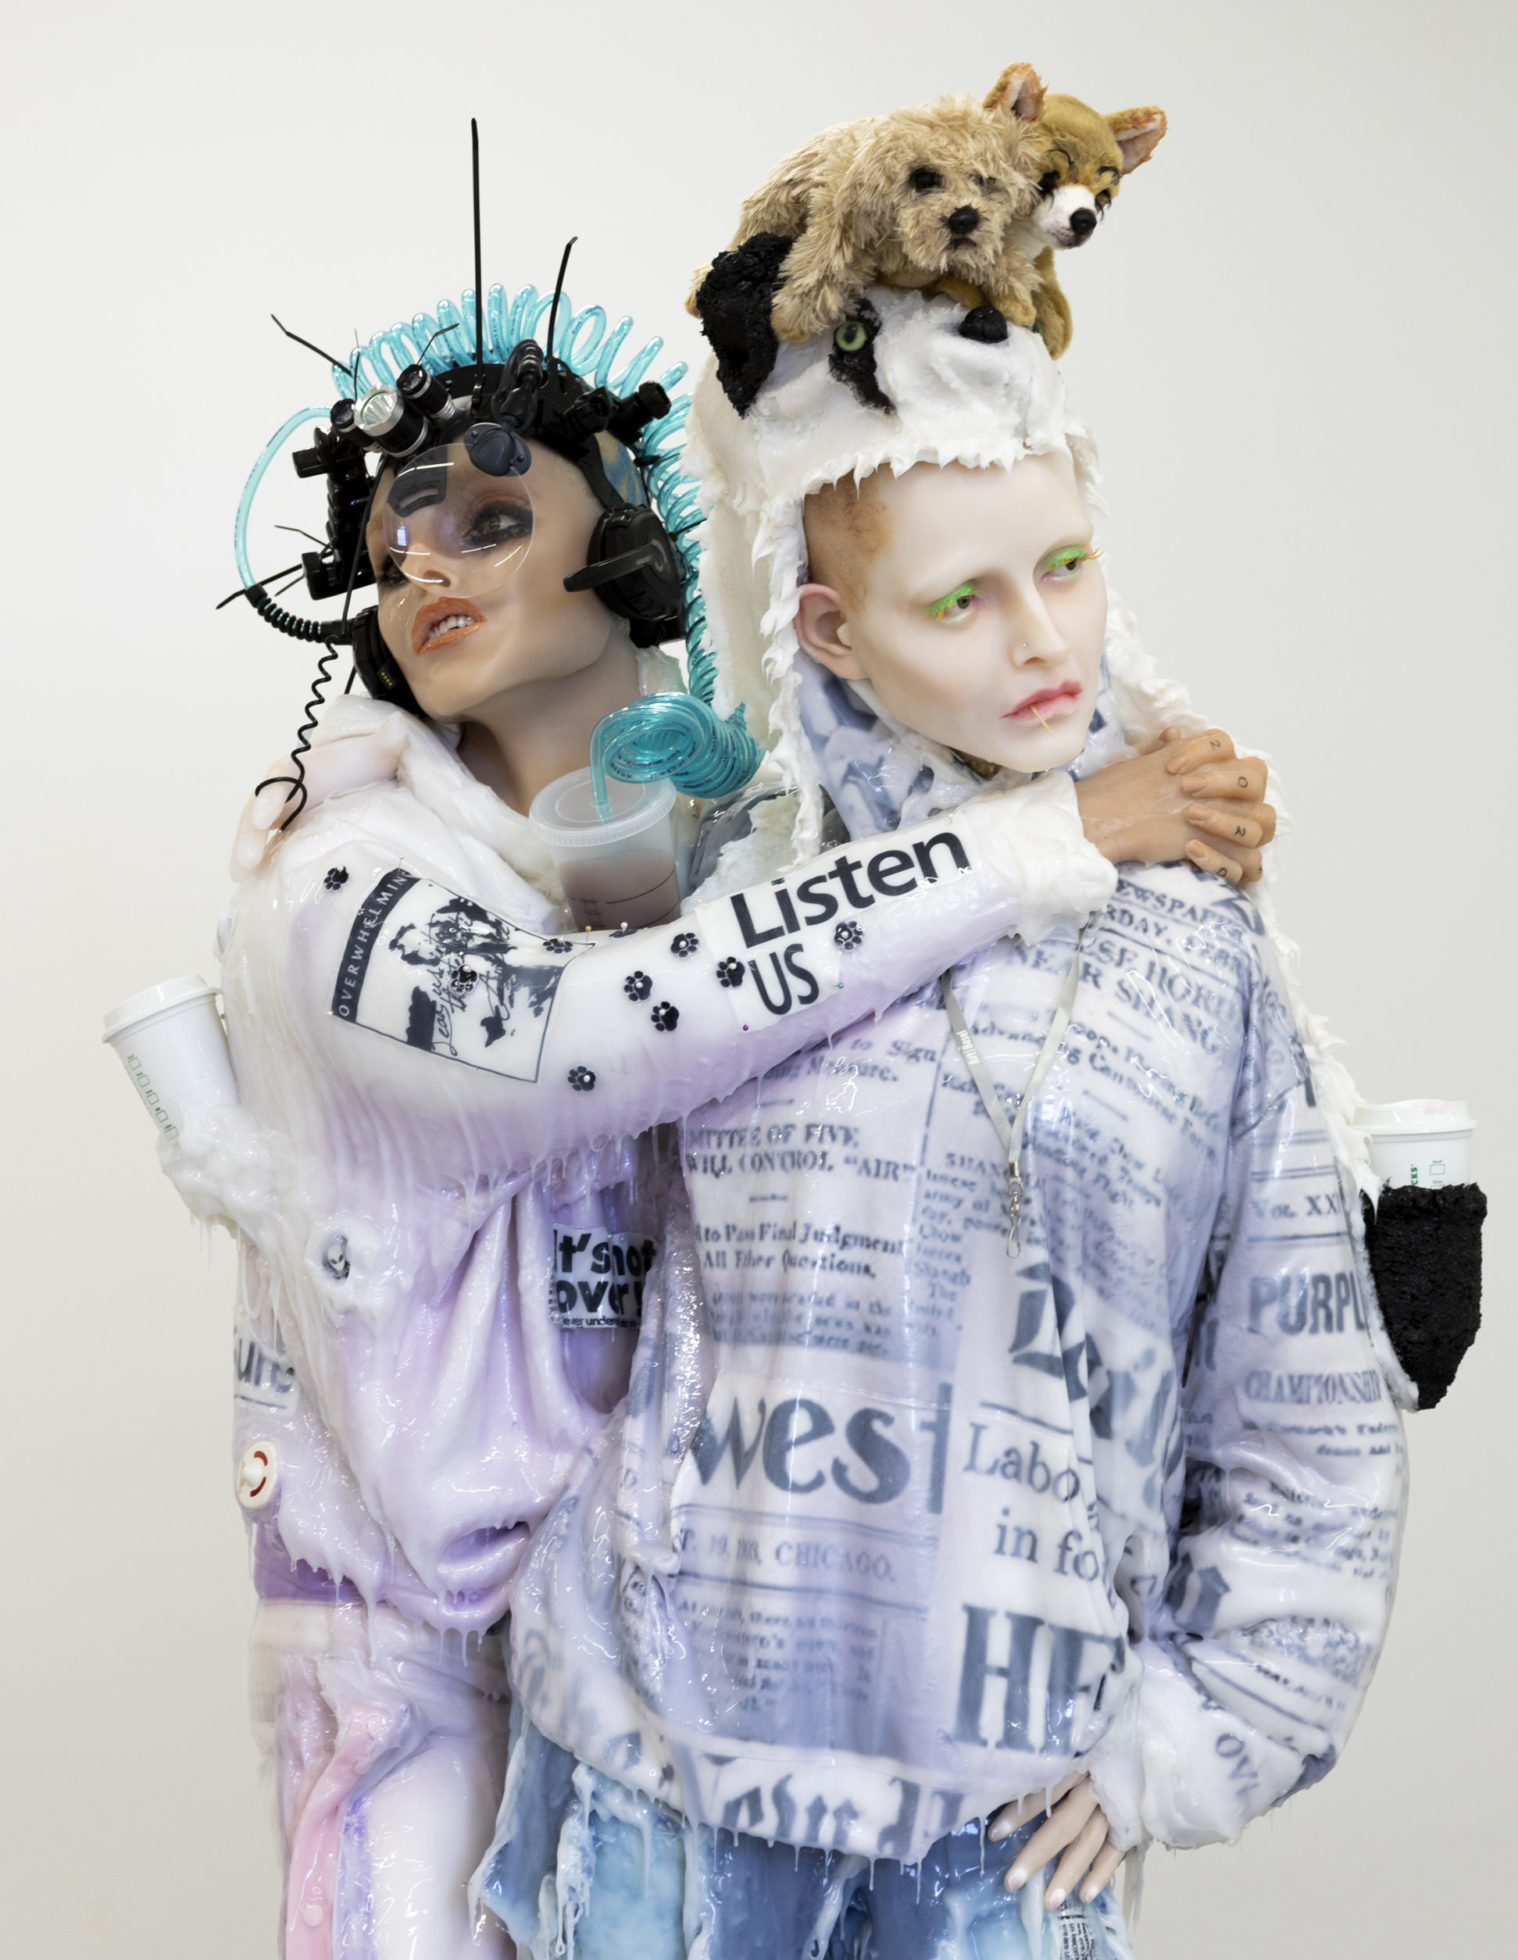 Two silicone figures dressed in white and pale-purple sweatshirts printed with text. Left-hand figure wears elaborate head-piece with plastic face-shield and curling plastic tubing in turquoise. Left-hand figure wraps arms around shoulders of right-hand figure, who stairs off, a white fur hood and two stuffed animals on their head. Both figures drip clear goop